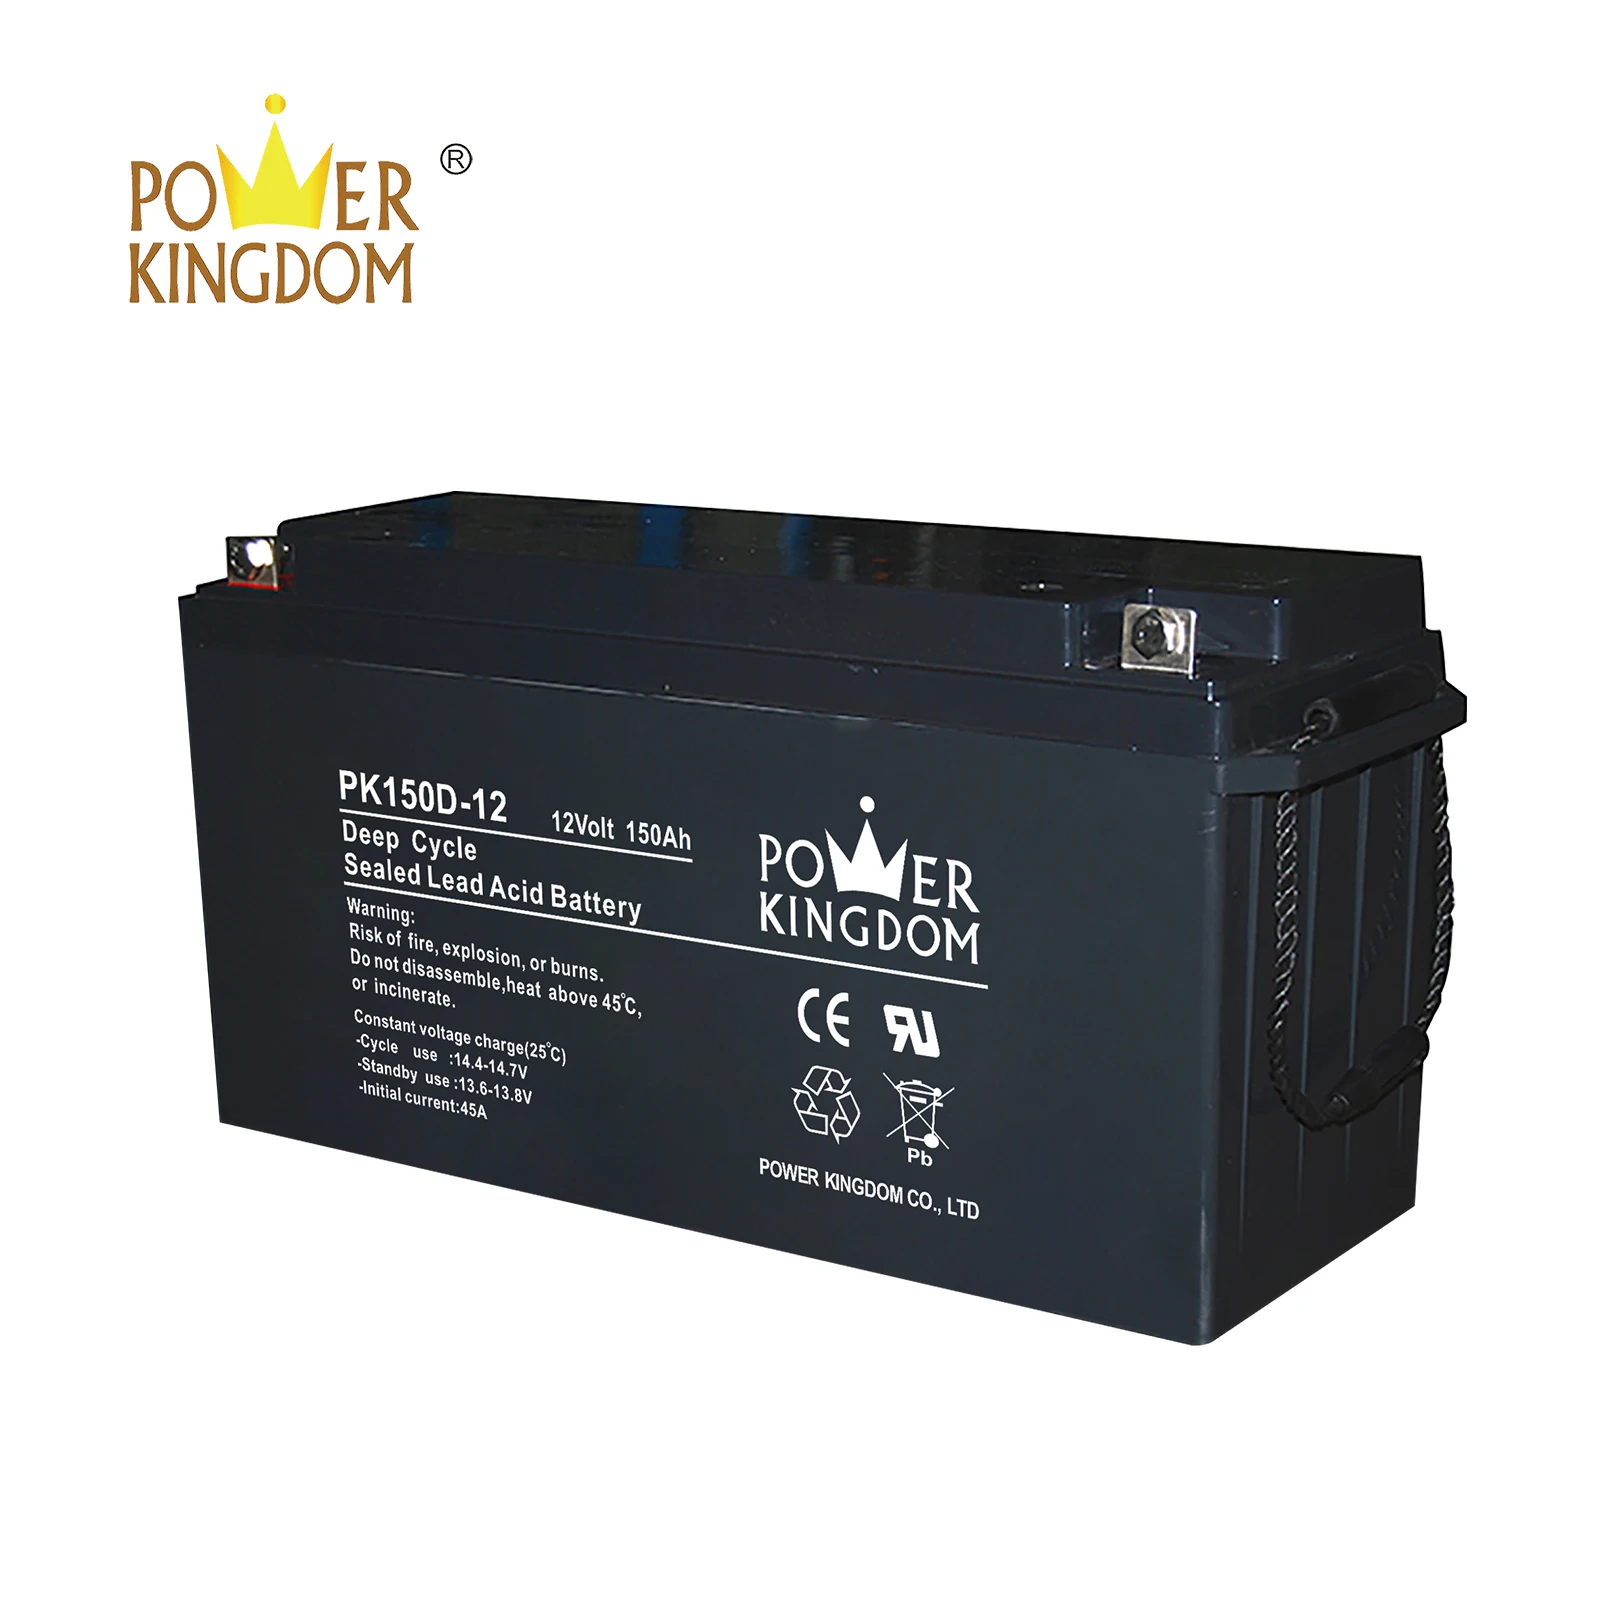 Power Kingdom cycle 130 amp deep cycle battery Supply deep discharge device